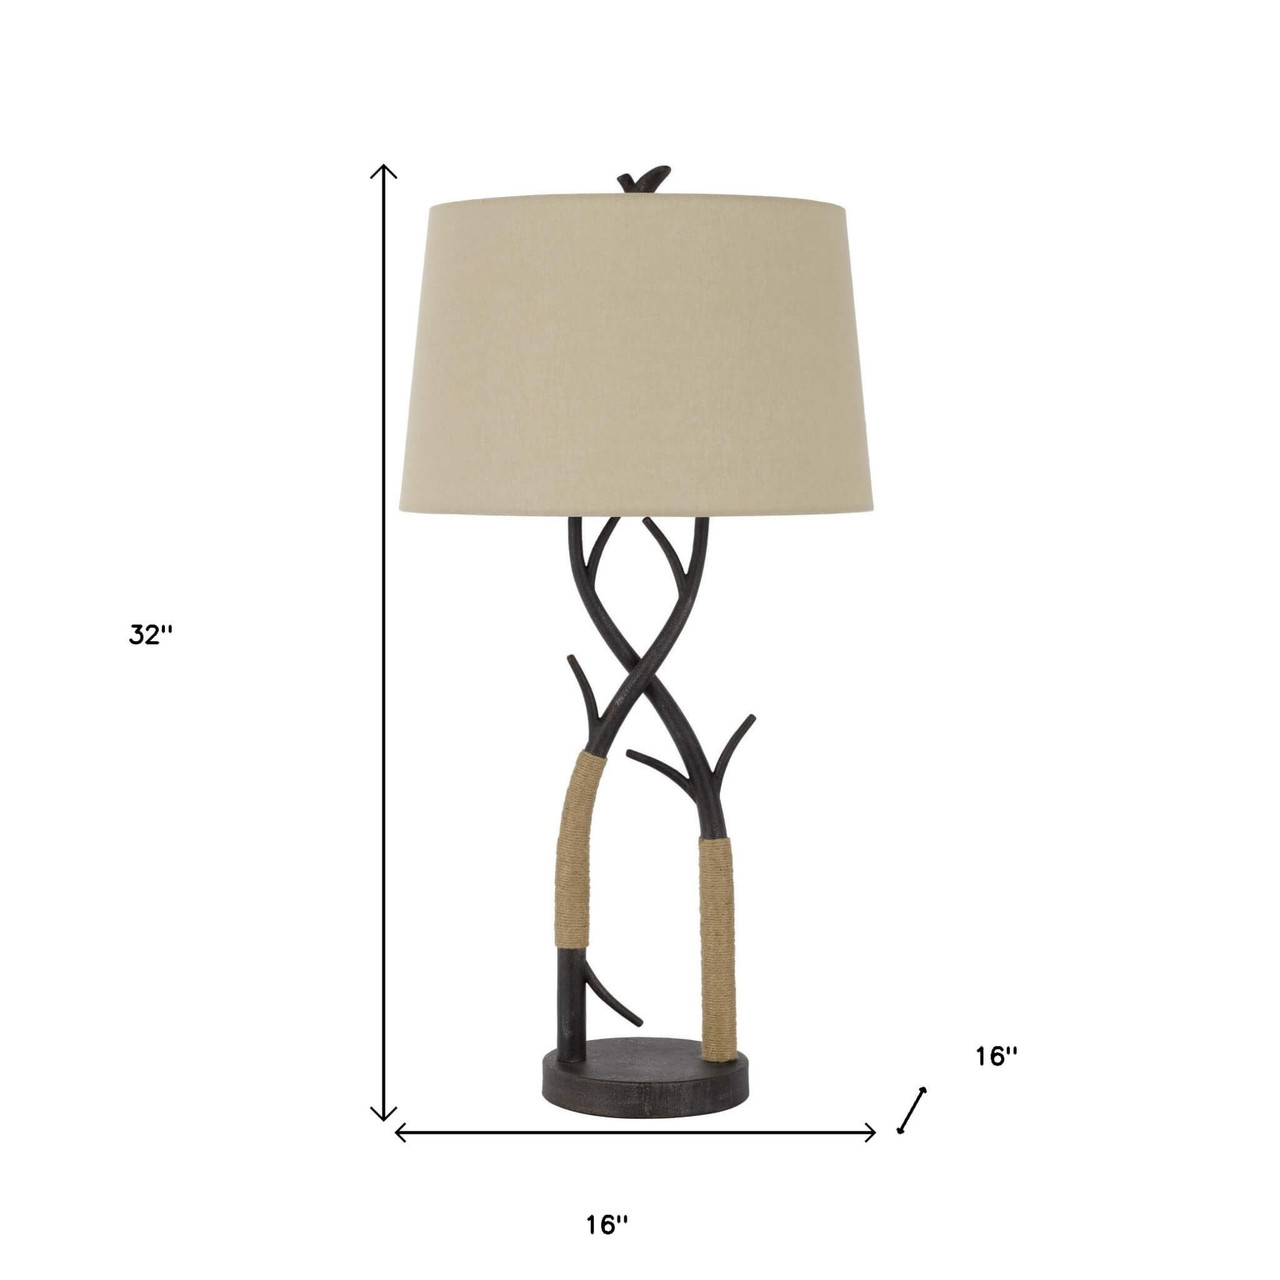 32" Charcoal Metal Table Lamp With Tan Empire Shade - Chicken Pieces